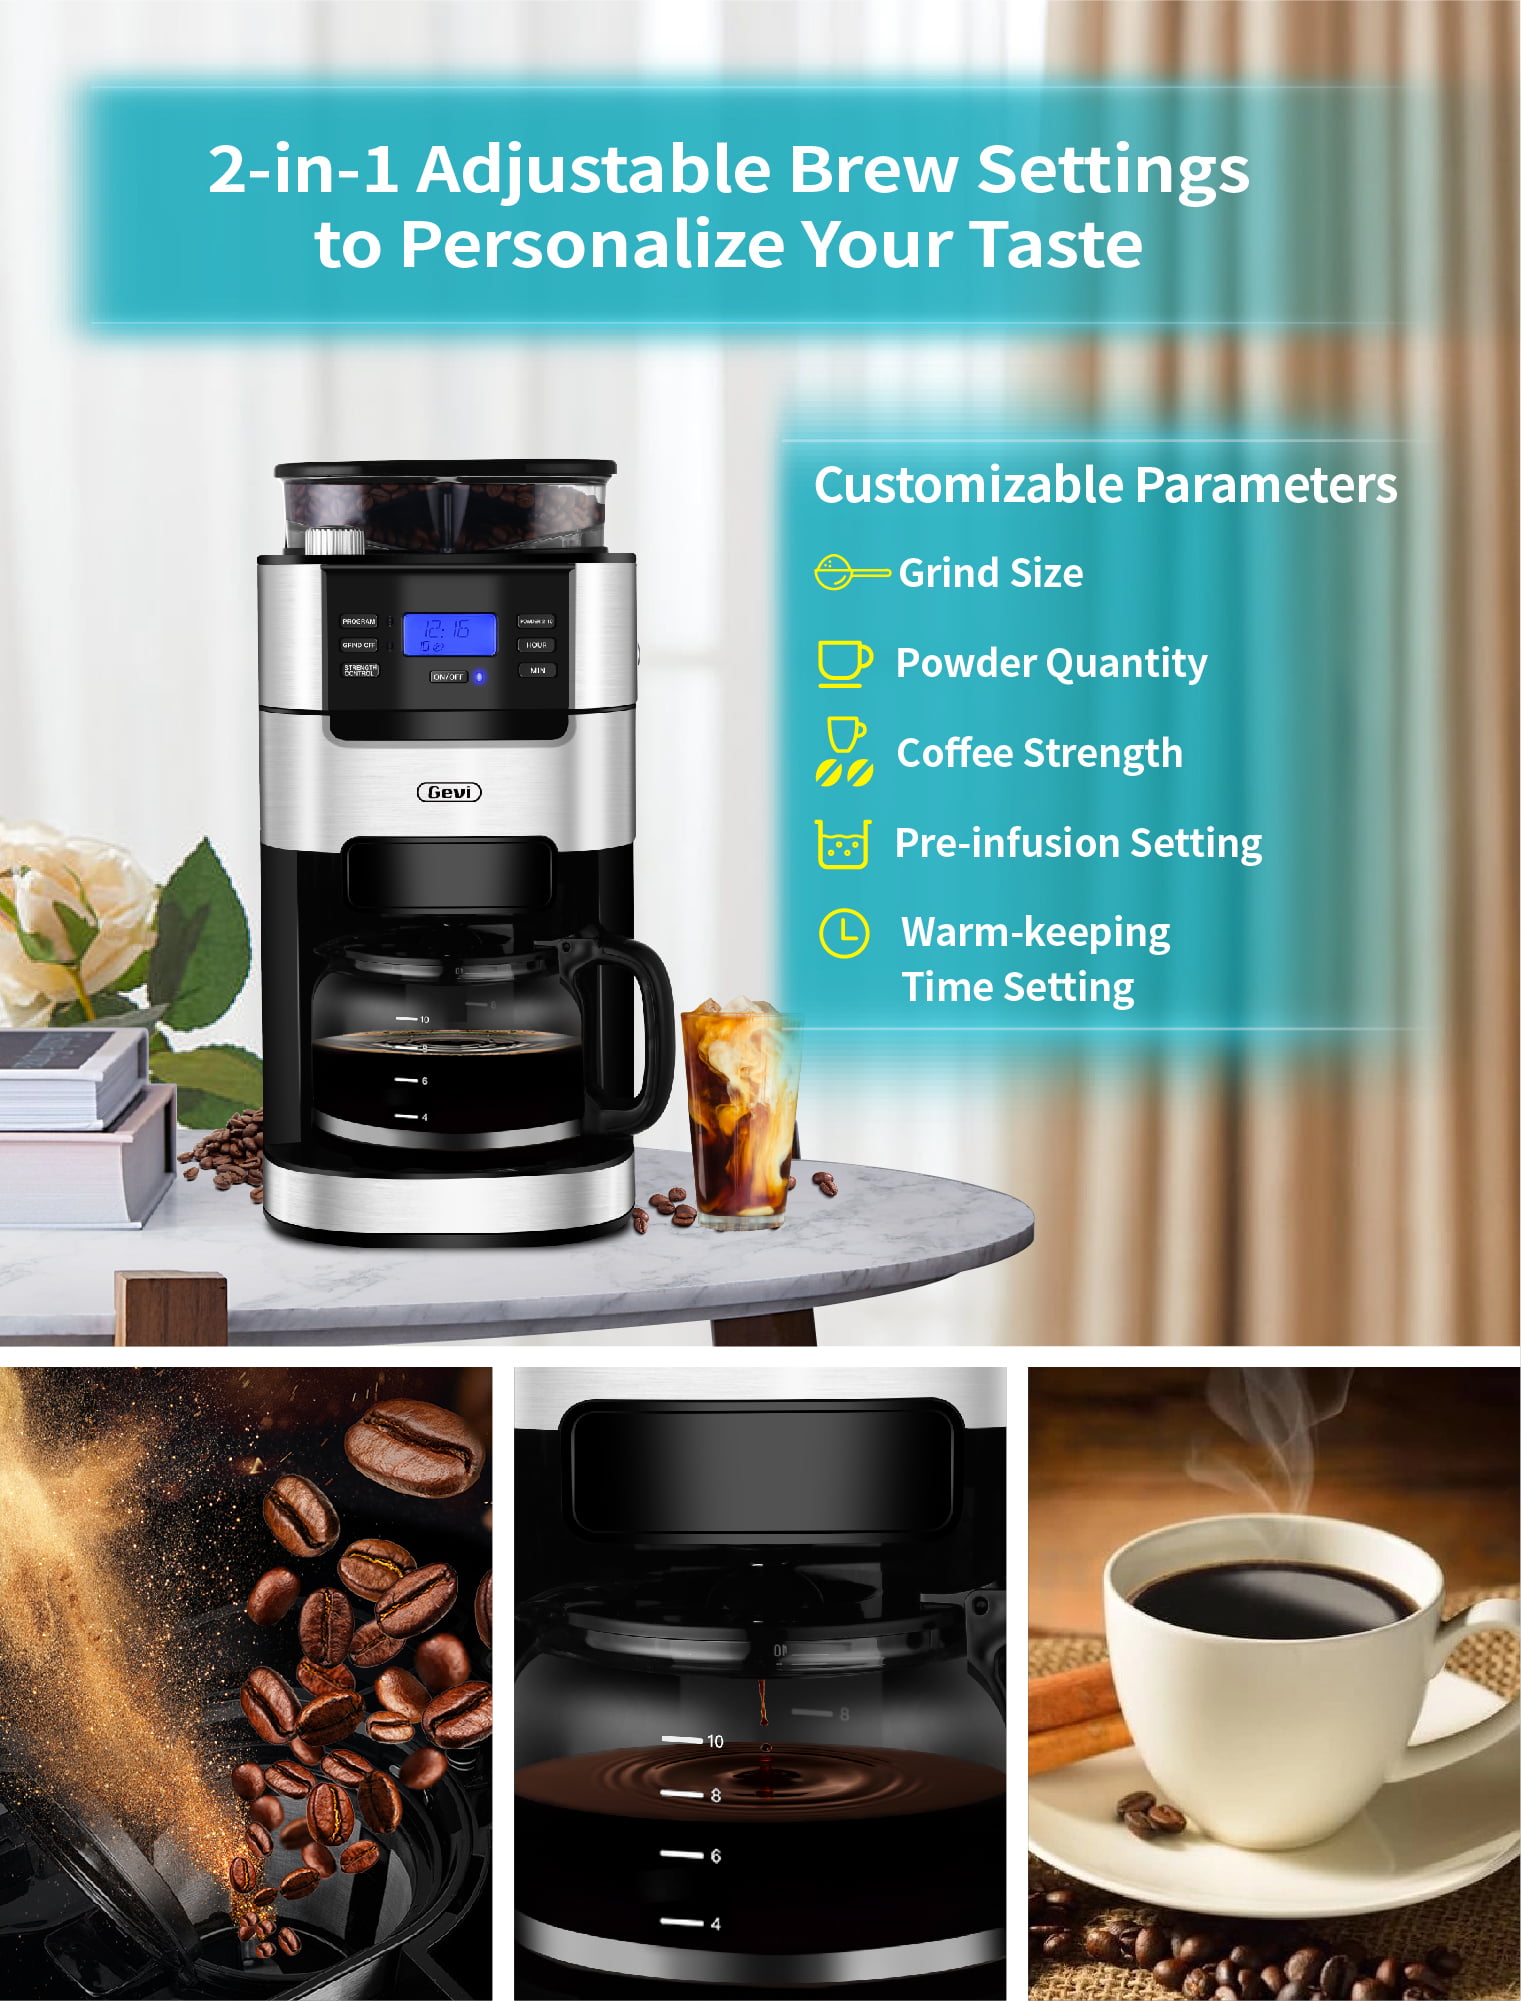 Gevi 5 Cups Small Coffee Maker, Compact Coffee Machine with Reusable  Filter, Warming Plate and Coffee Pot for Home and Office